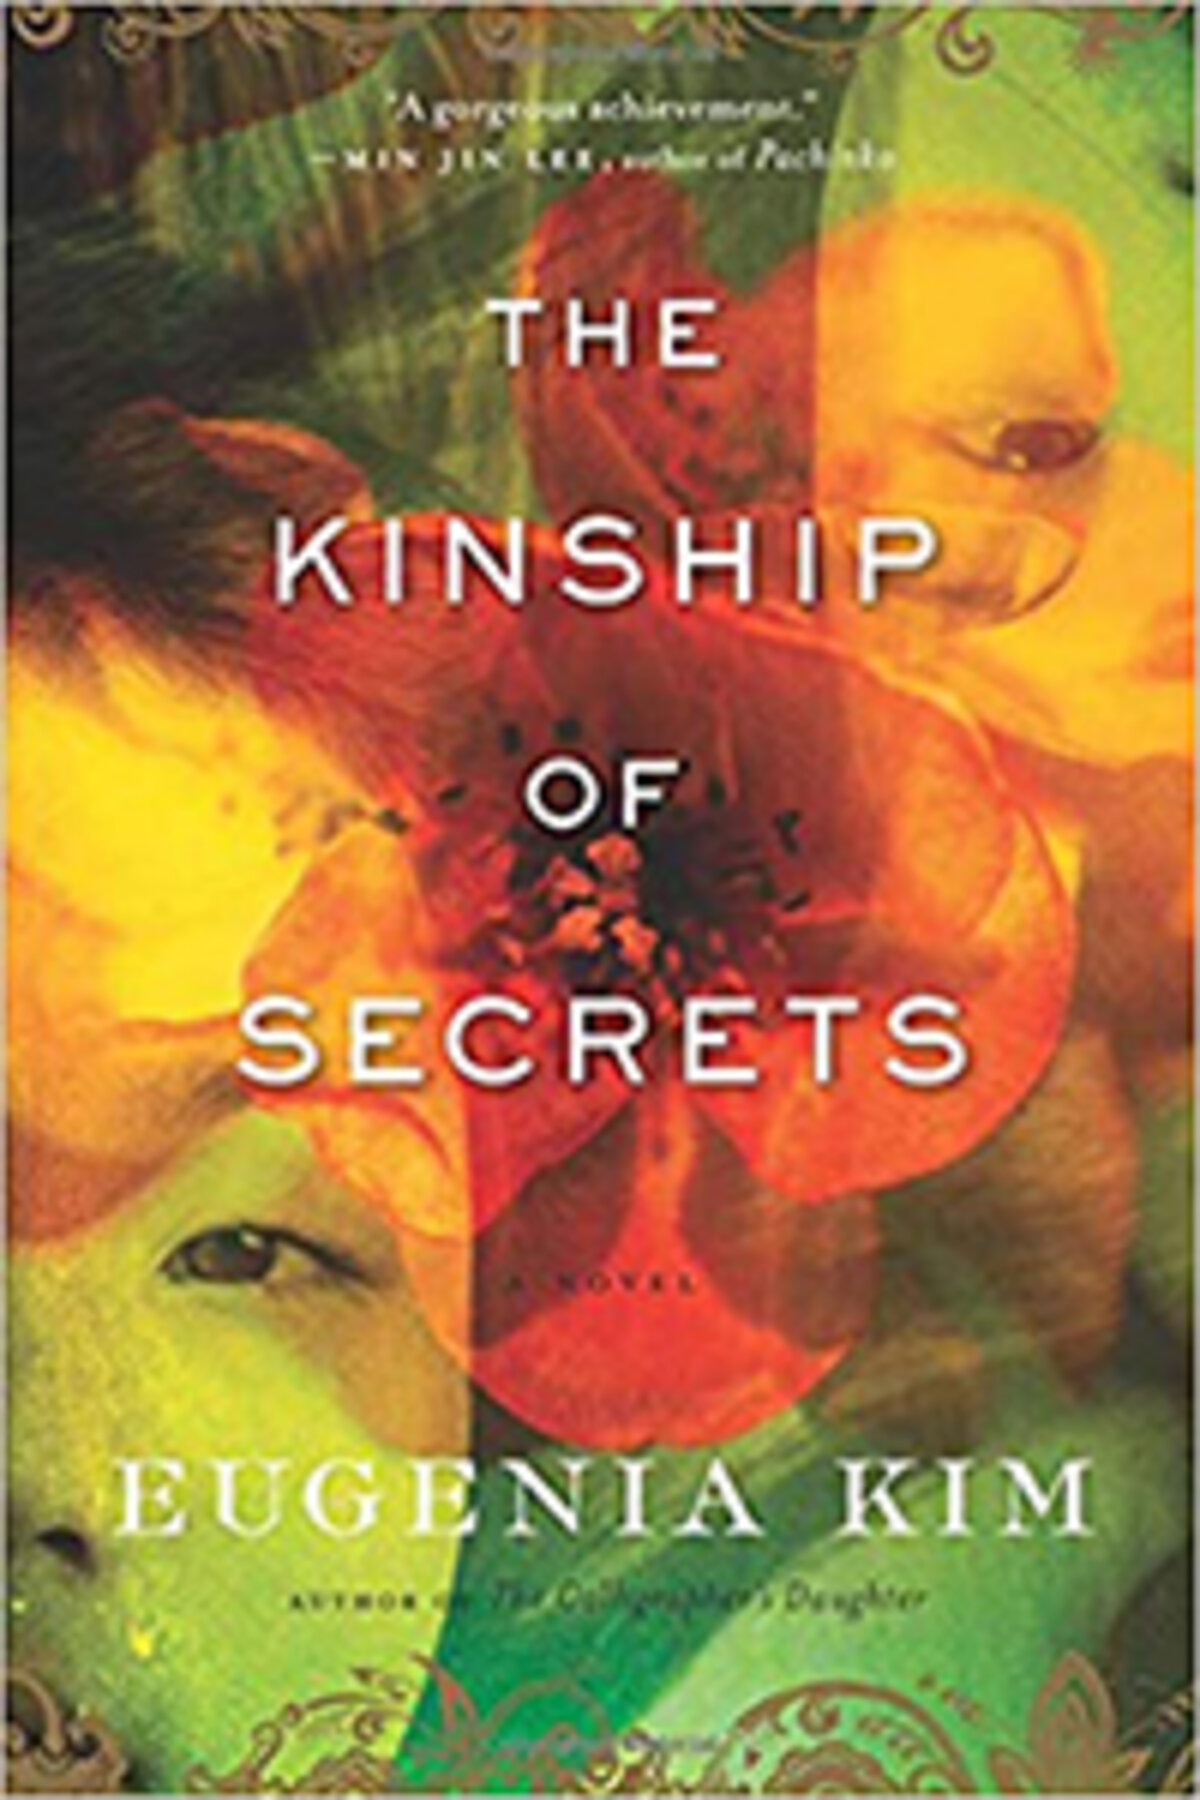 Portion of person's face and flower on book cover of The Kinship of Secrets by Eugenia Kim